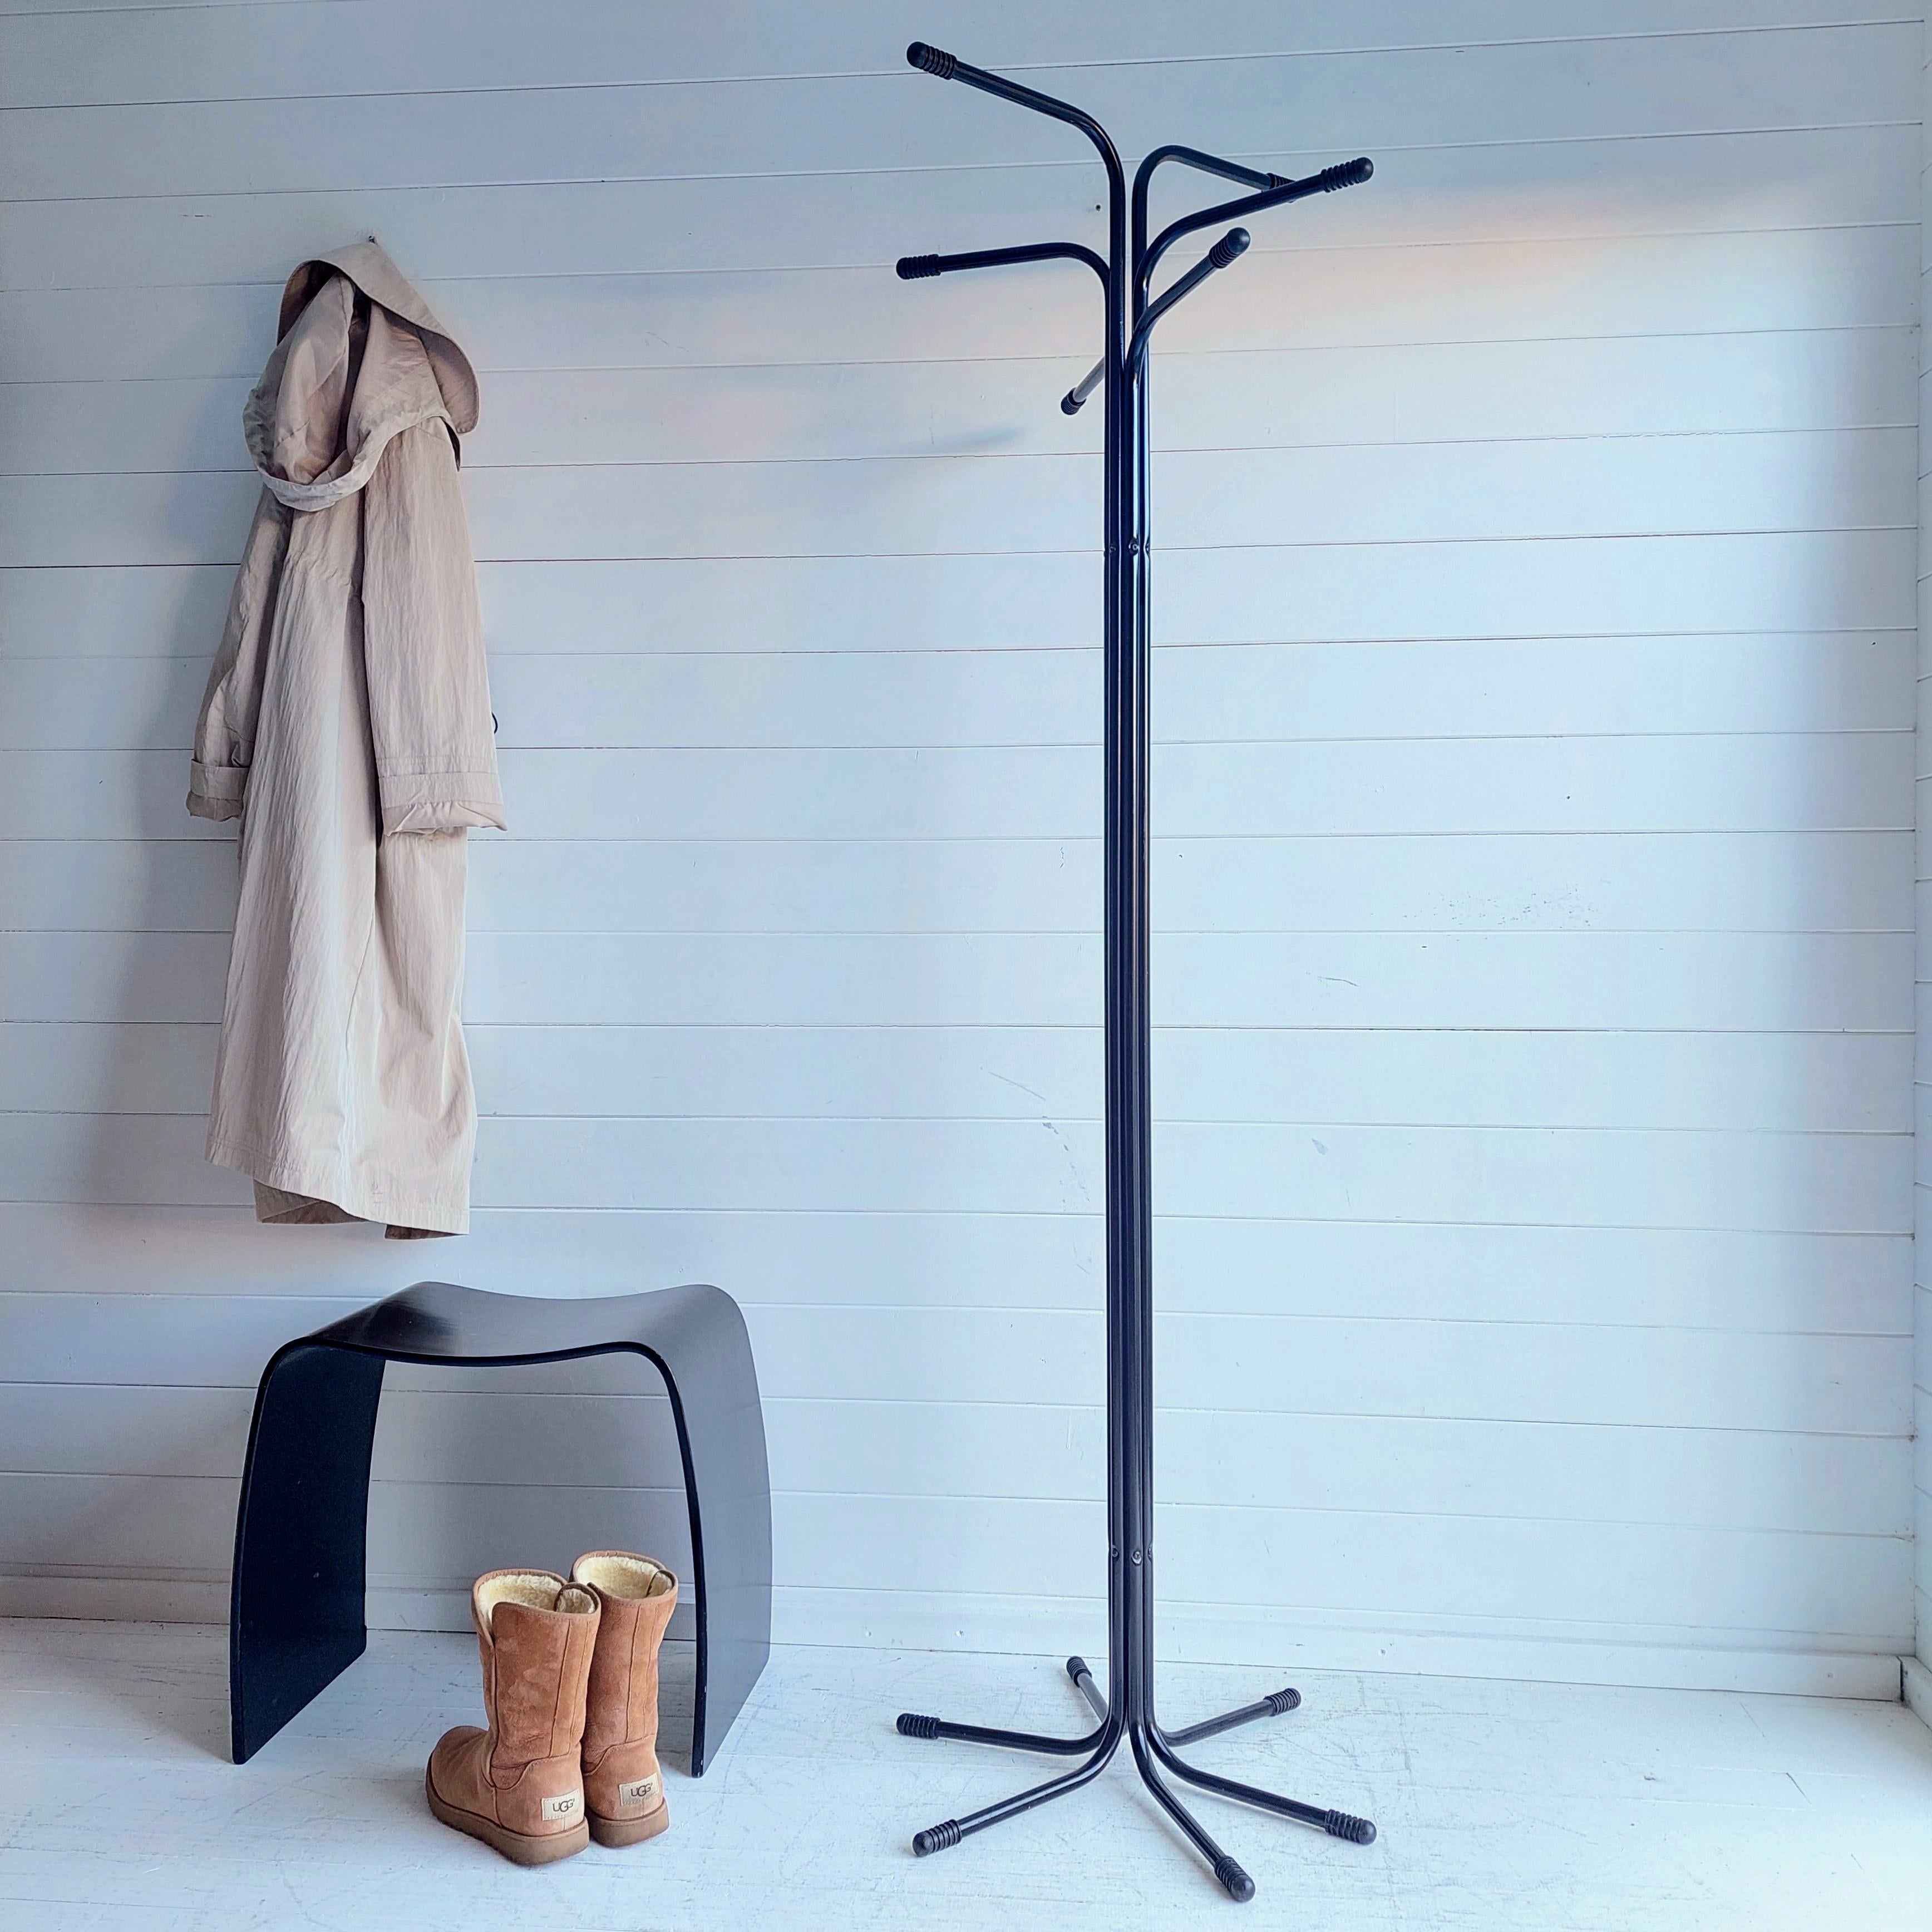 Rare find!
Rare Plagg coat rack by Tord Bjorklund for Ikea.
Metal coat stand made of six iron tubes lacquered in black with black plastic tips.
Emblematic piece of the 80s by a famous designer of Ikea.
Great vintage 80s IKEA curved metal coat